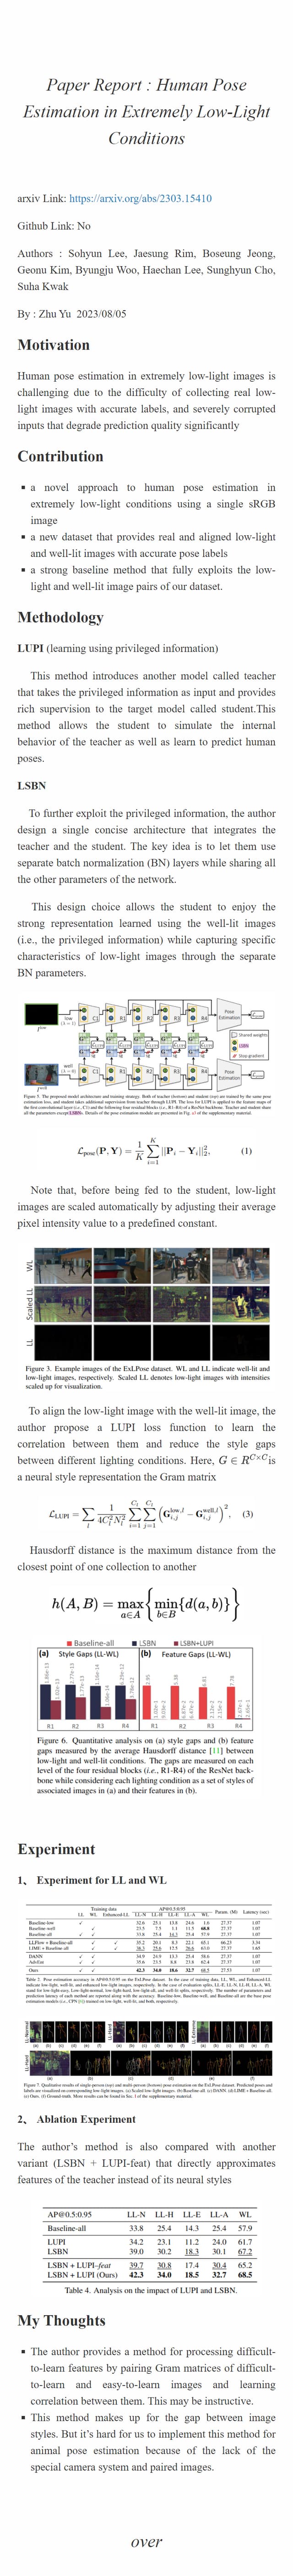 Human Pose Estimation in Extremely Low-Light Conditions